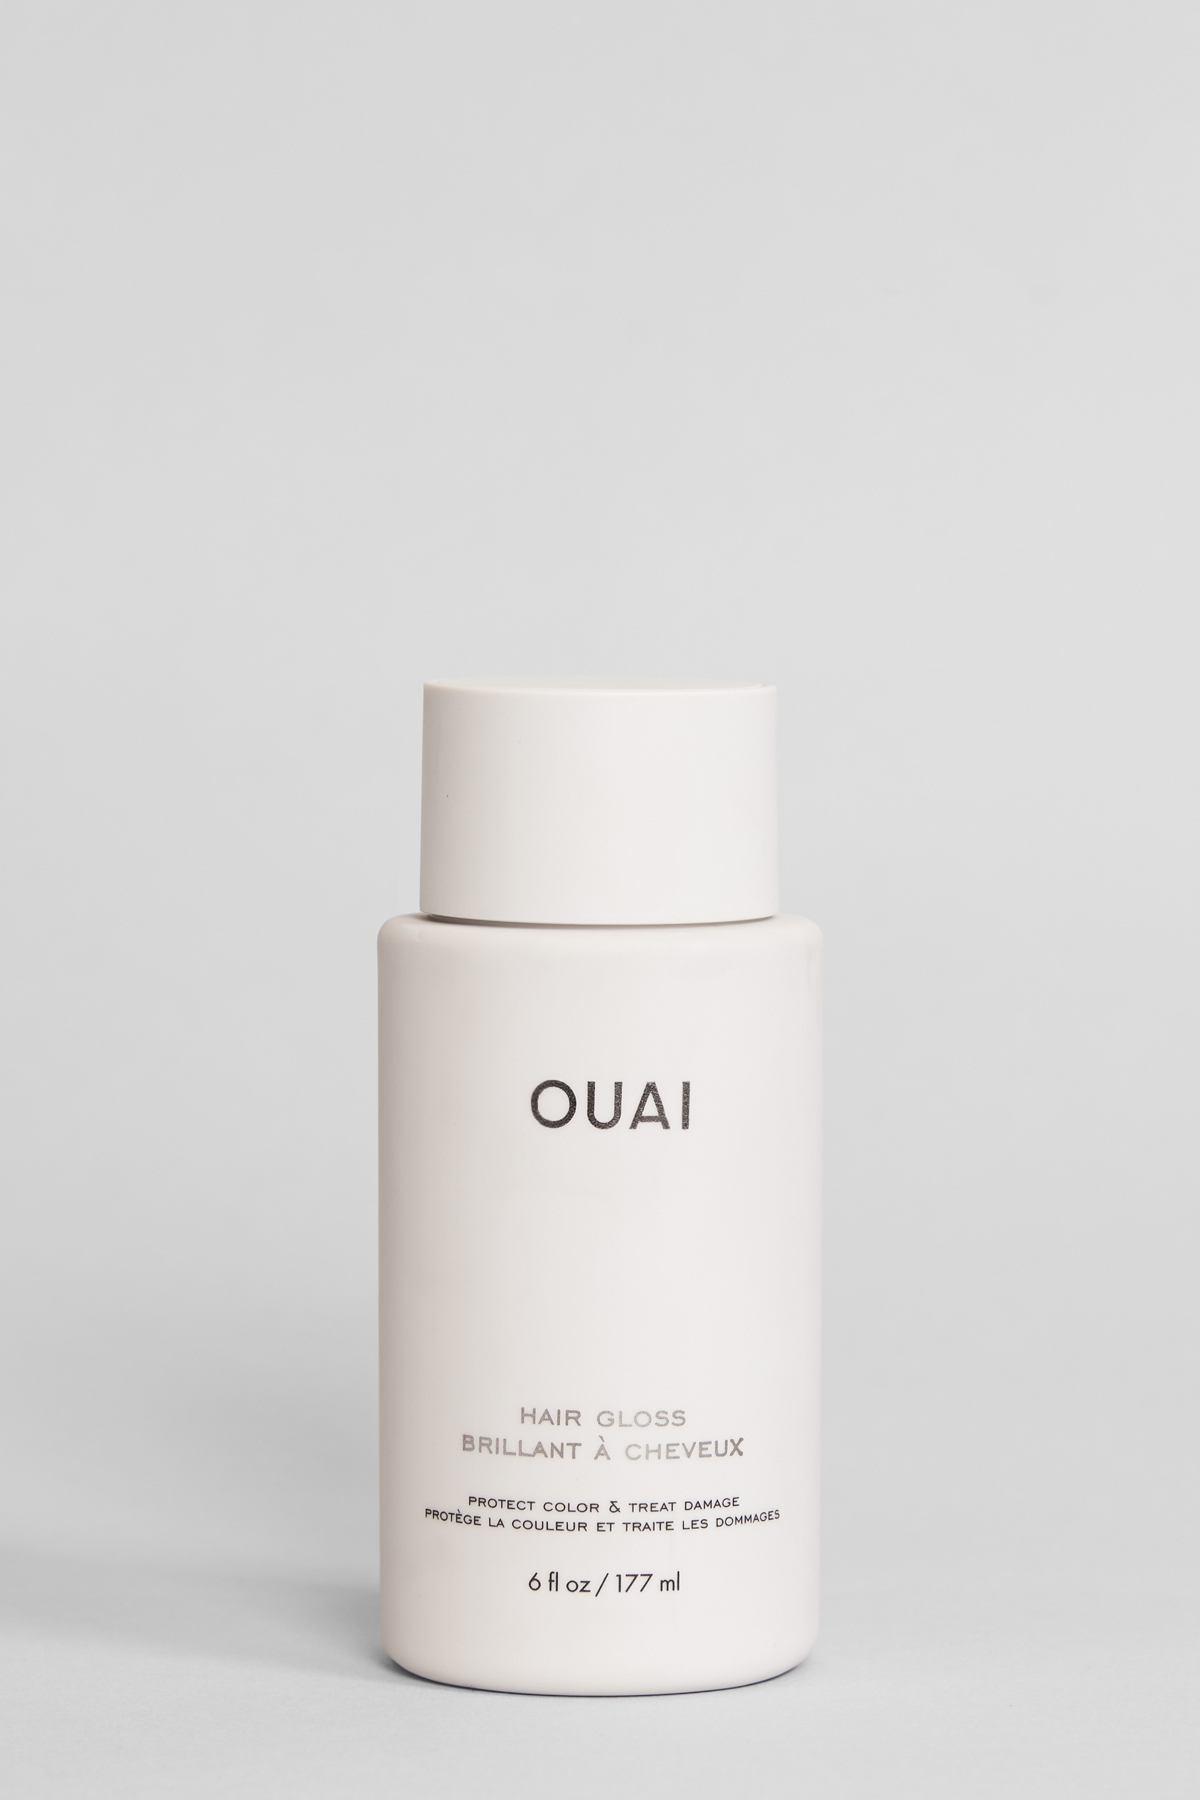 OUAI Gloss In-Shower Shine Treatment shot in Marie Claire